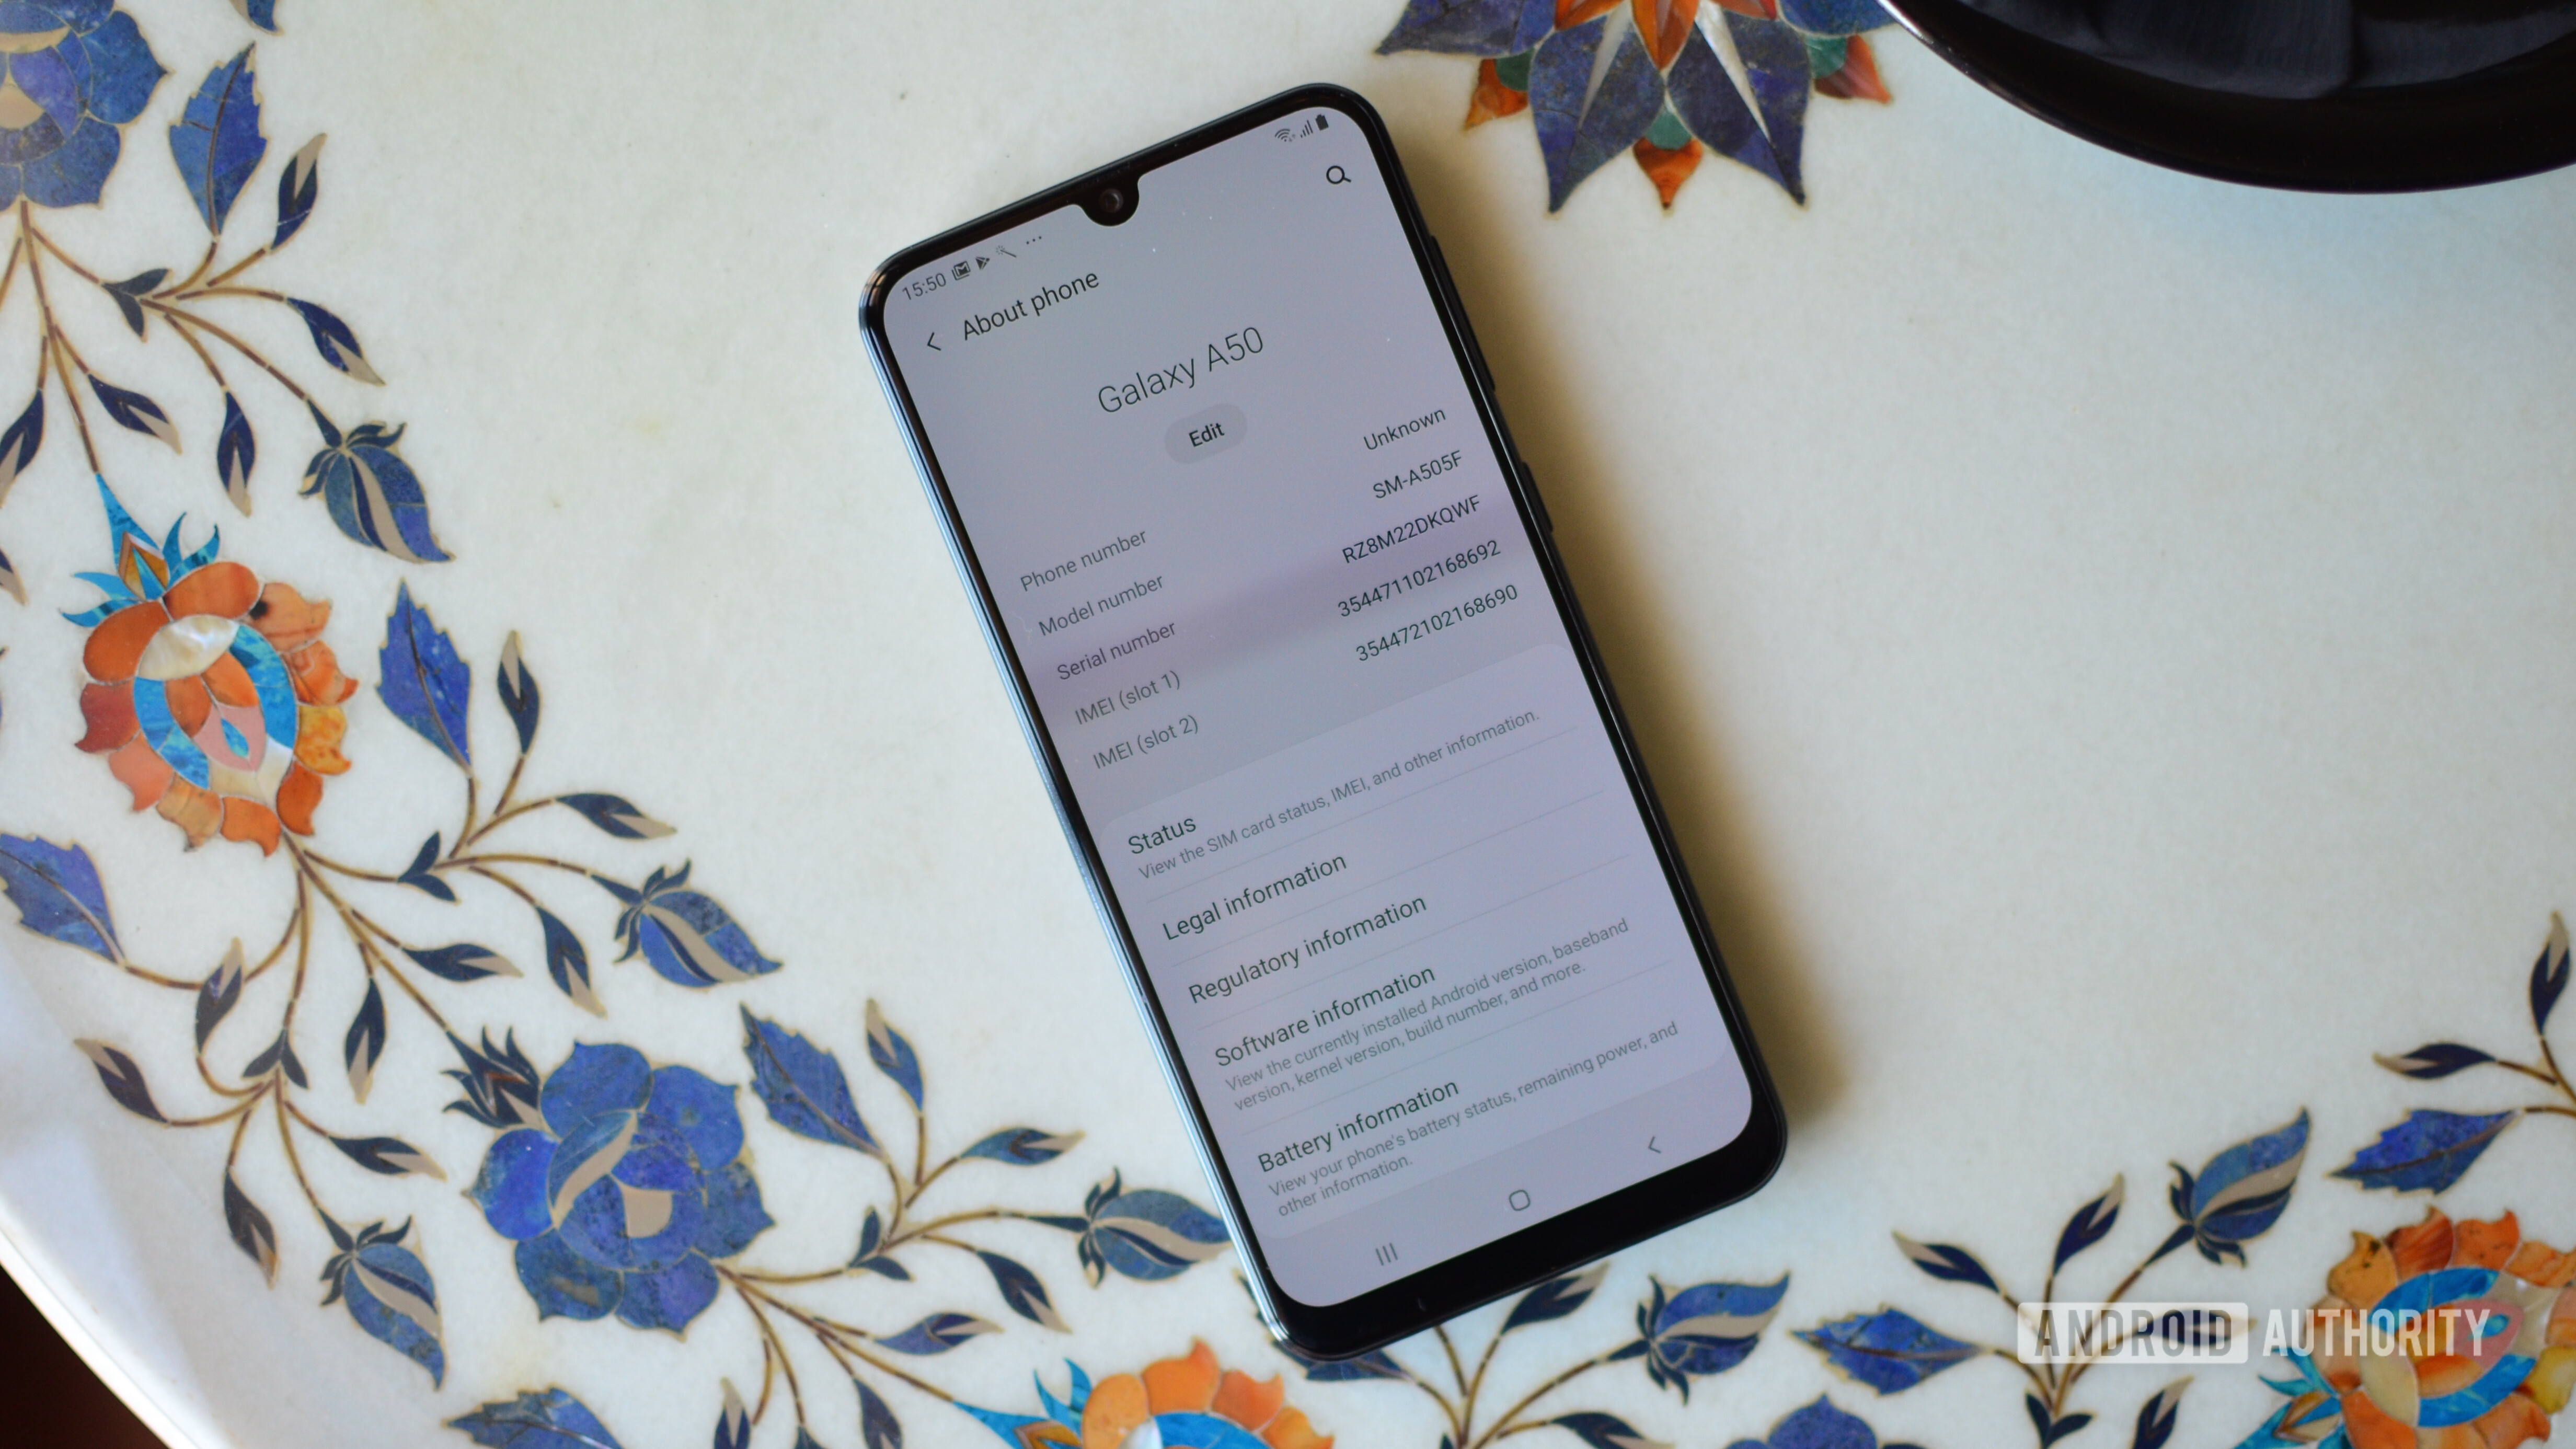 Samsung Galaxy A50 front display and about screen